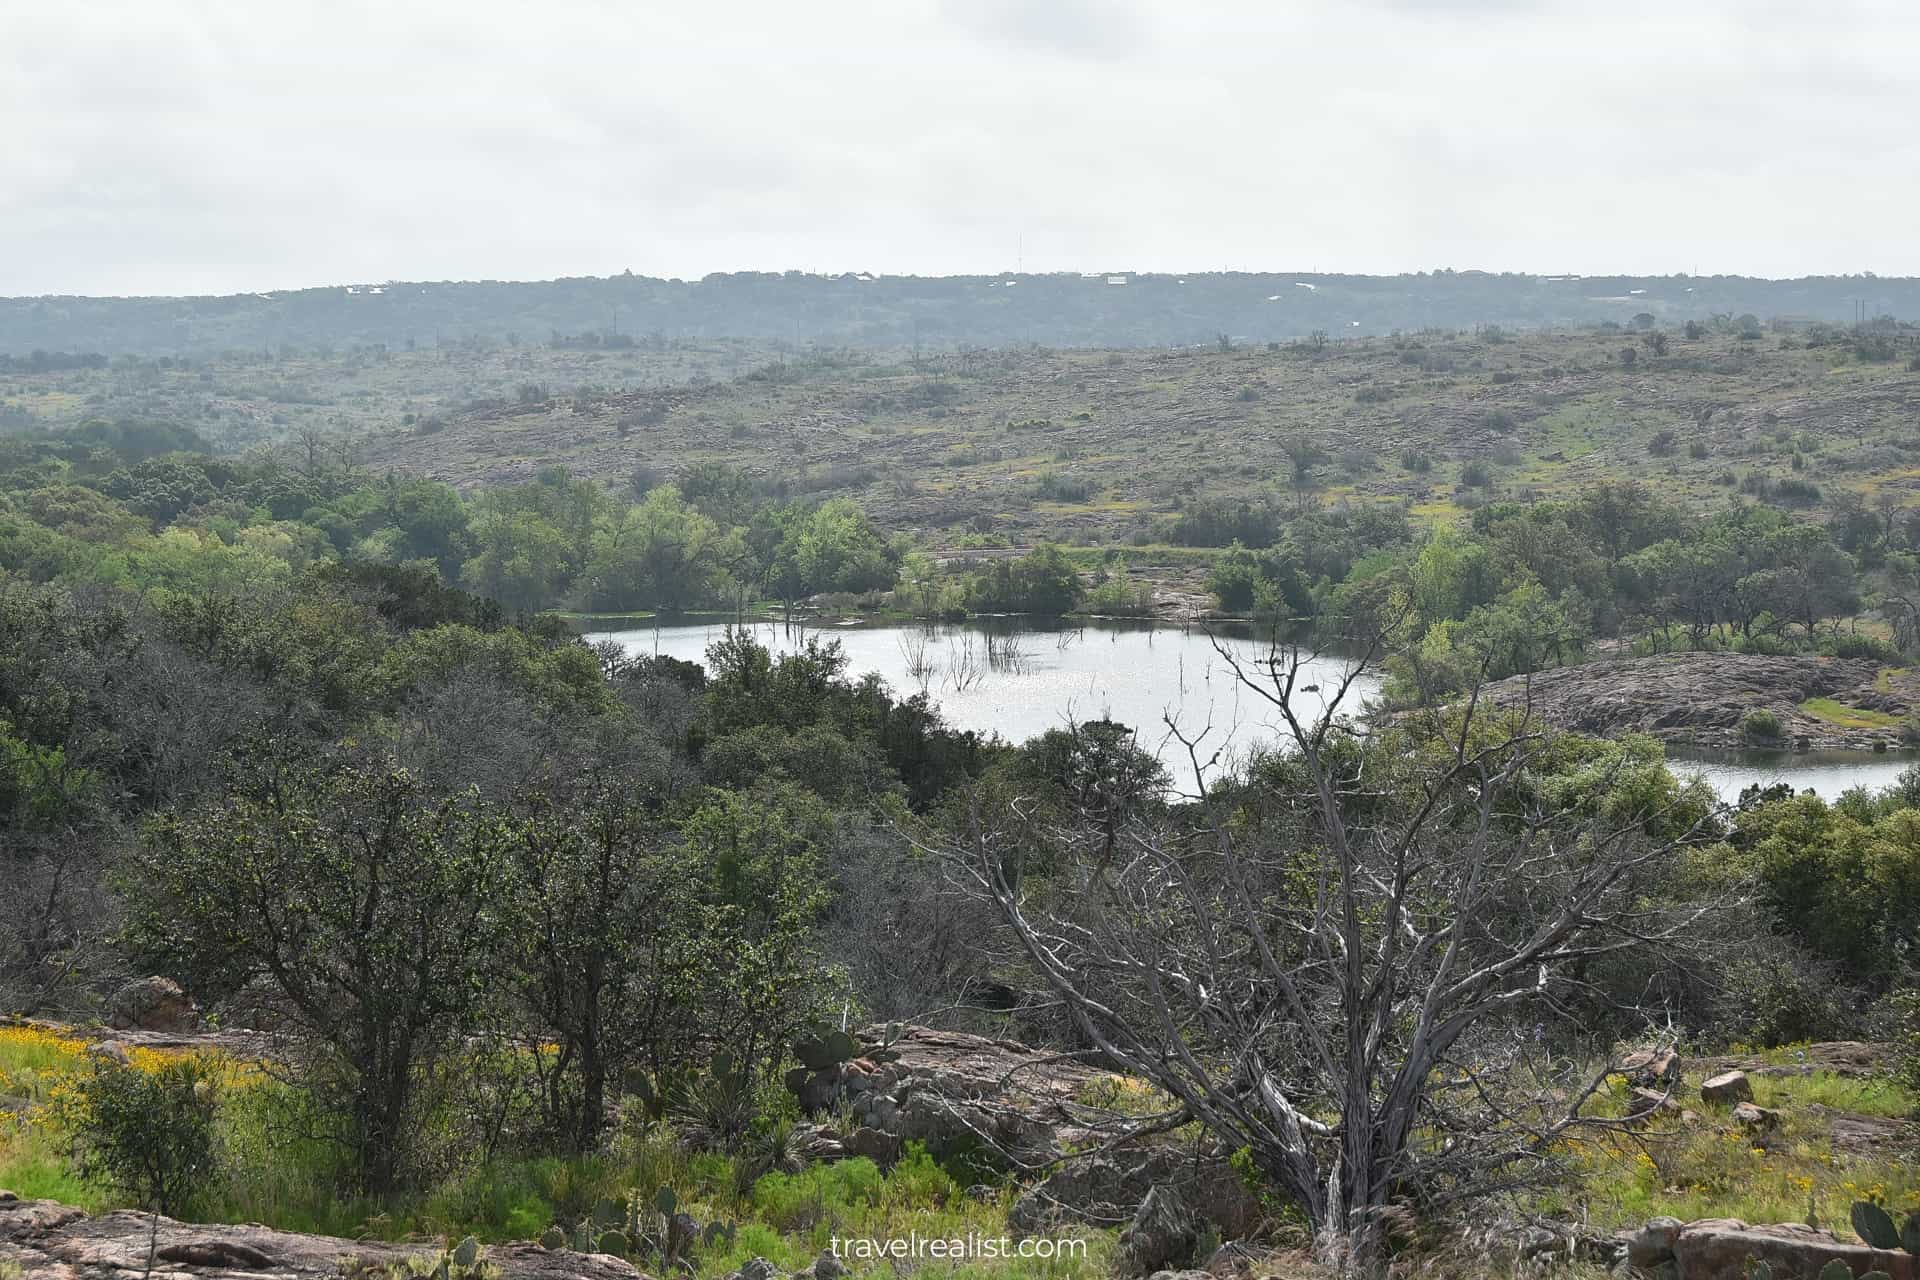 Inks Lake State Park: 5 Things to See Year Round